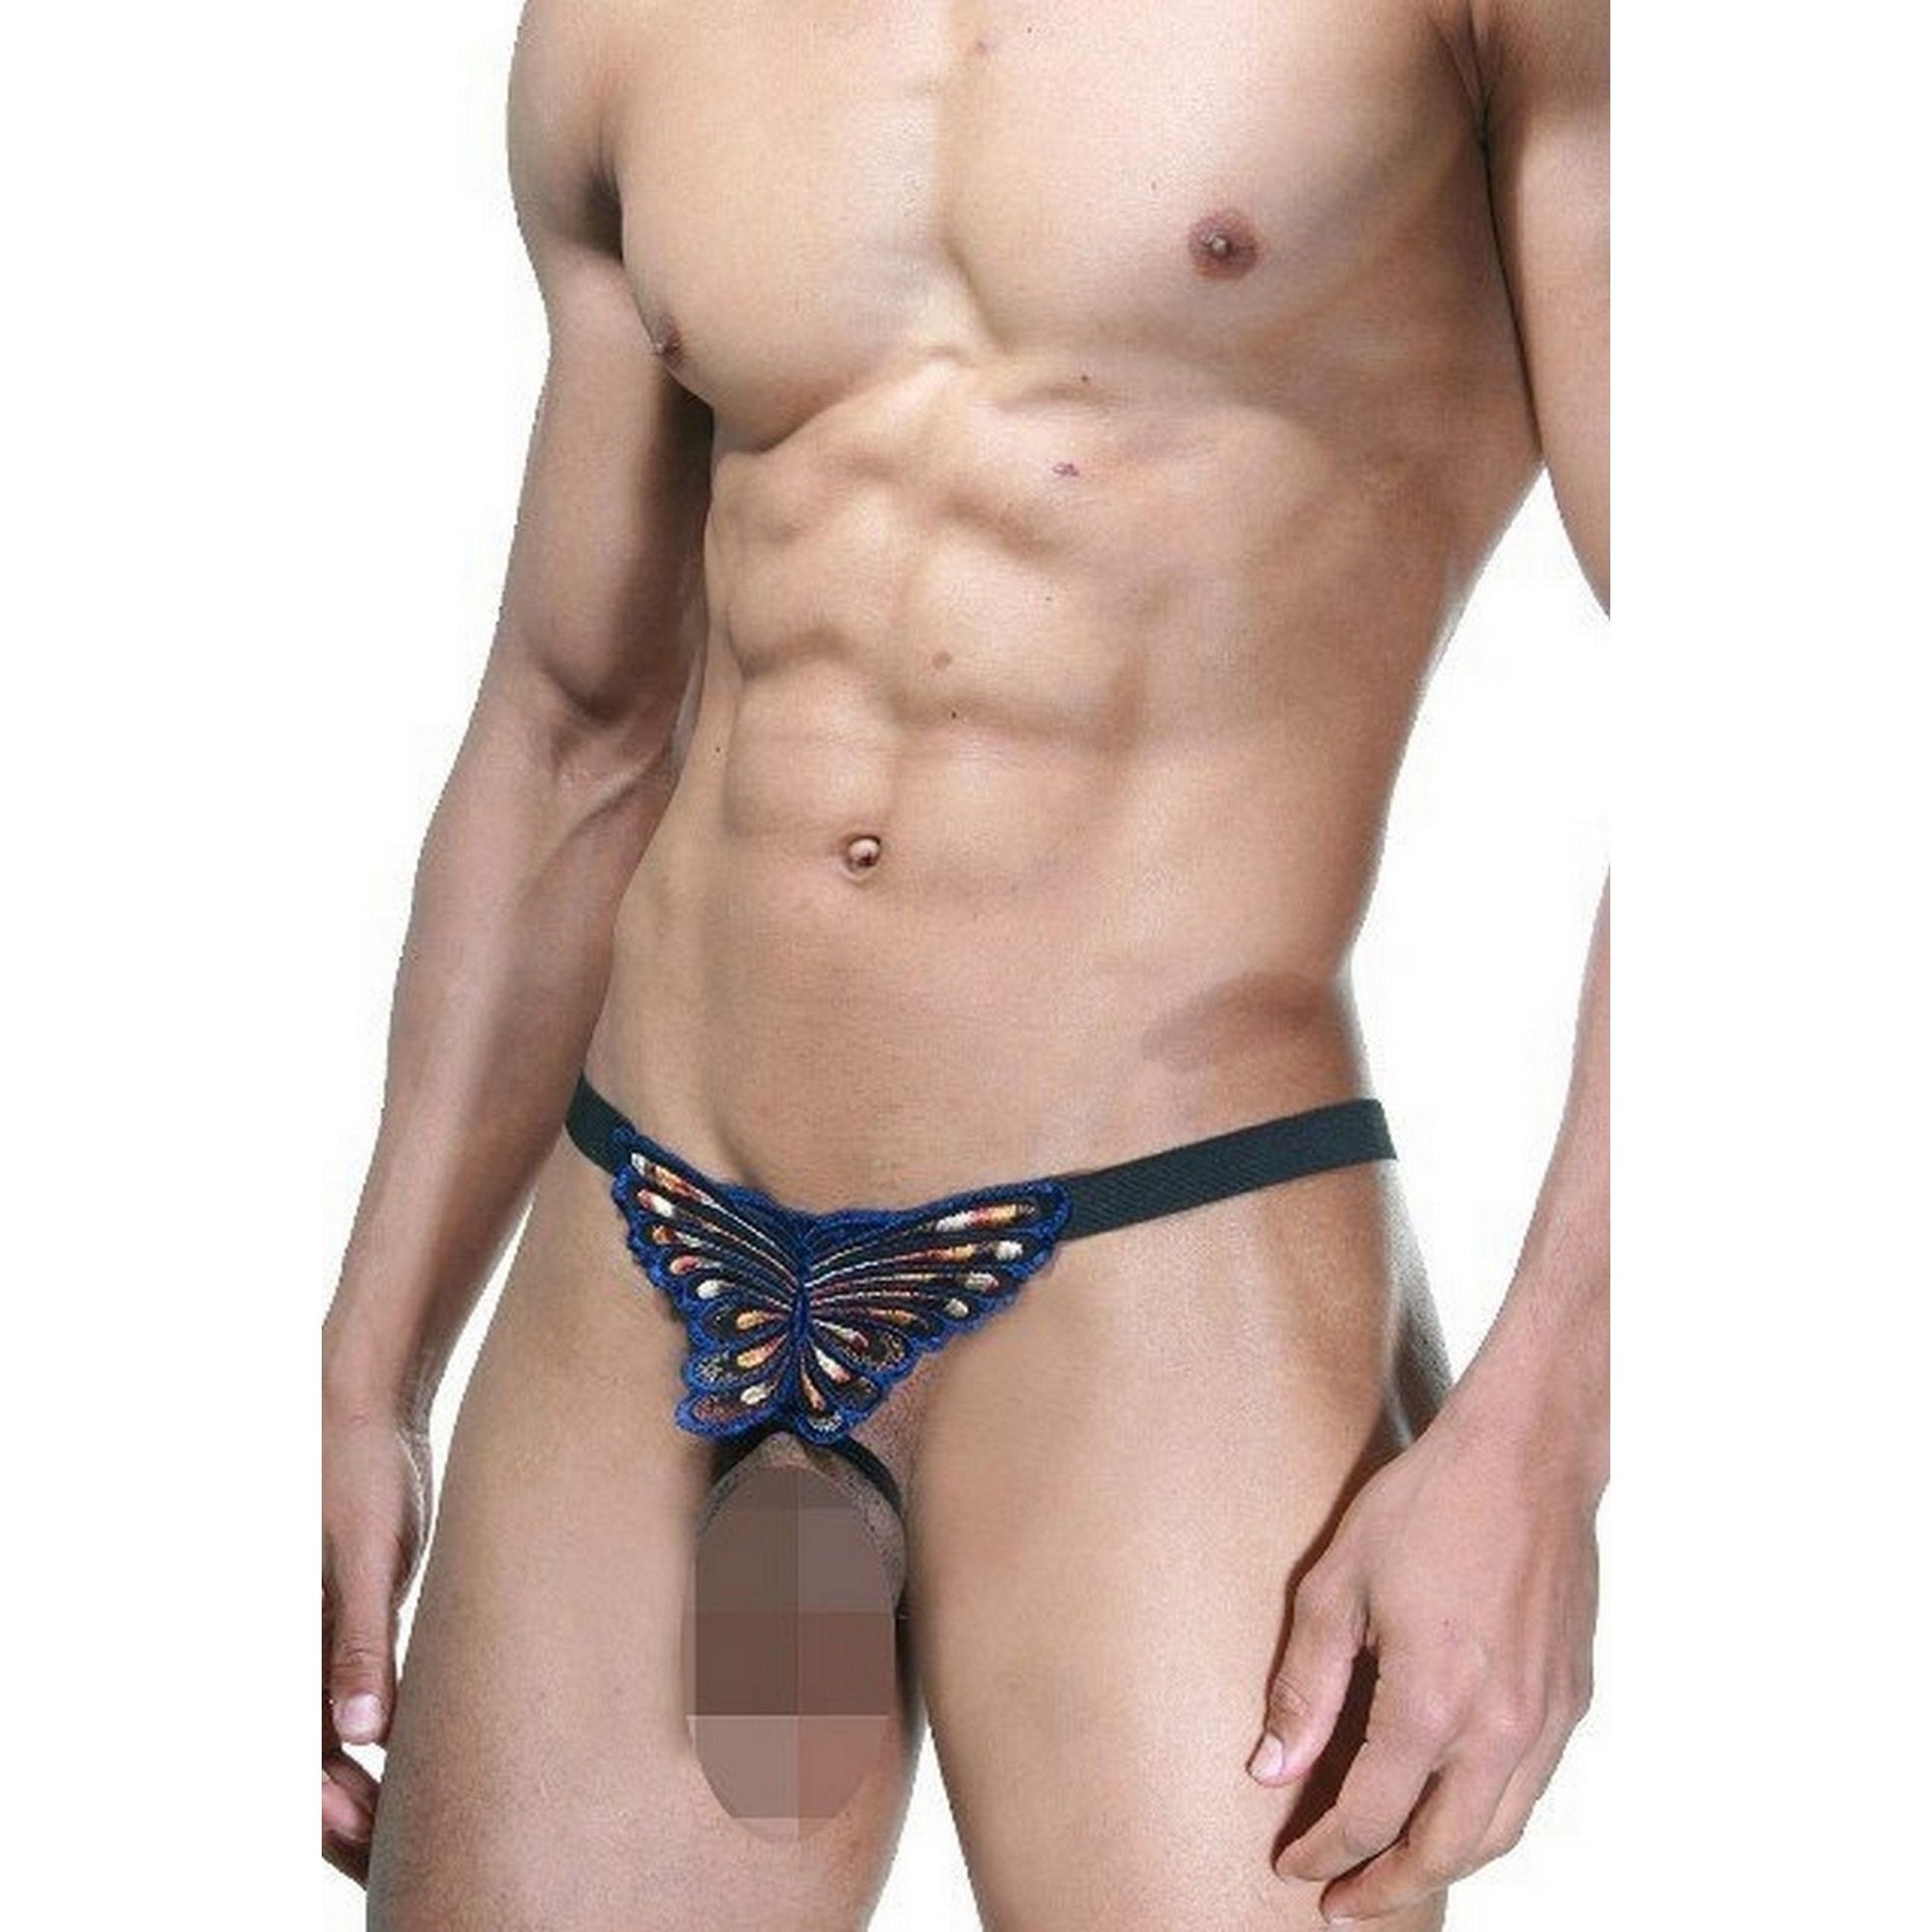 Men's Crotchless Uncensored Thong Panties - Sexy String Underwear